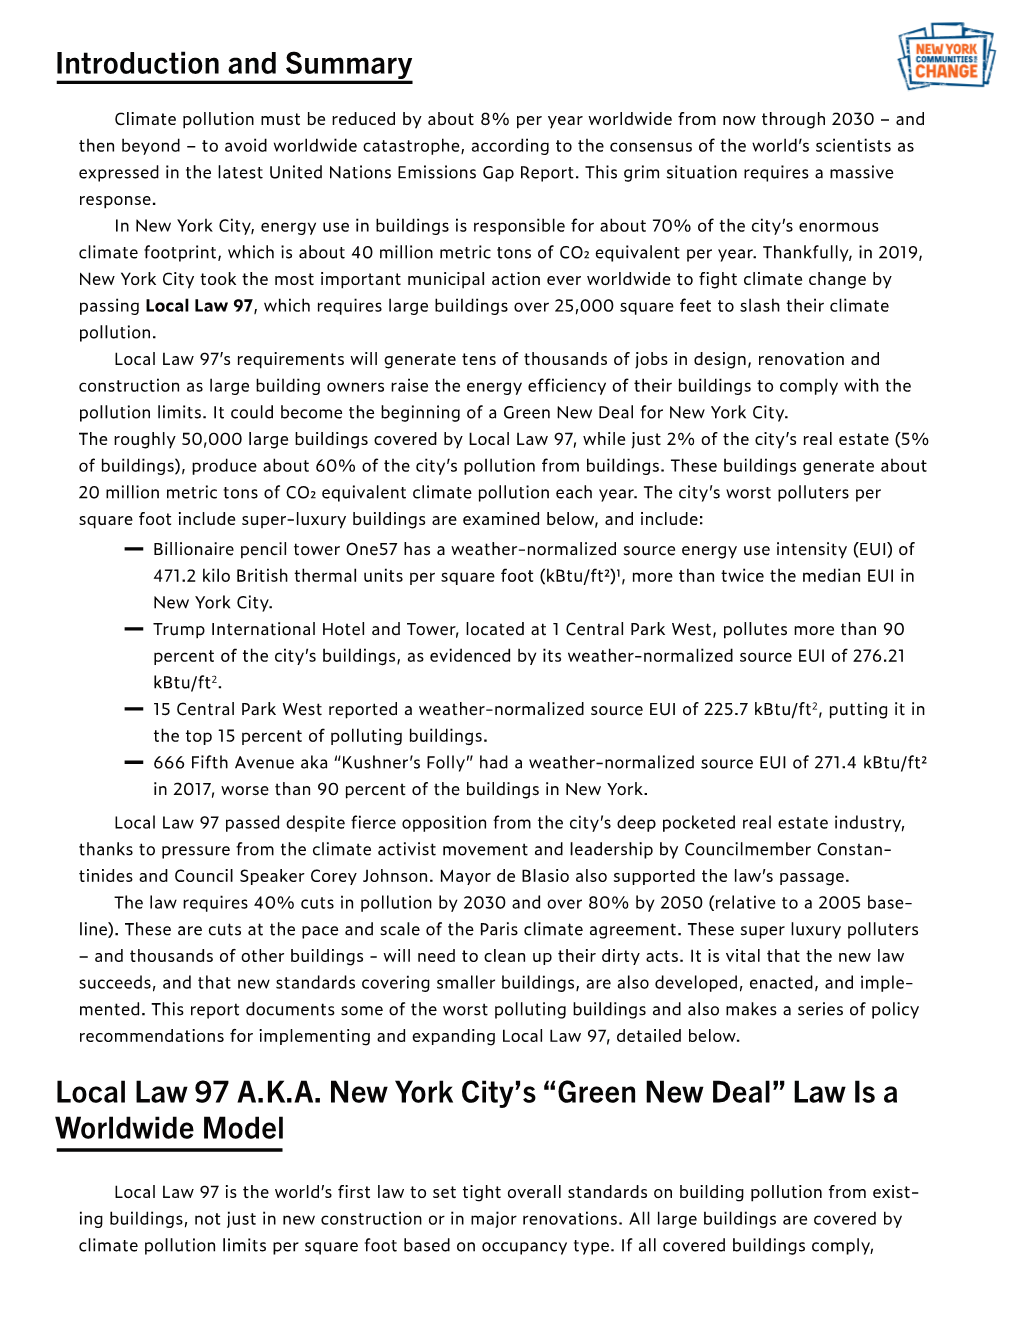 Introduction and Summary Local Law 97 A.K.A. New York City's “Green